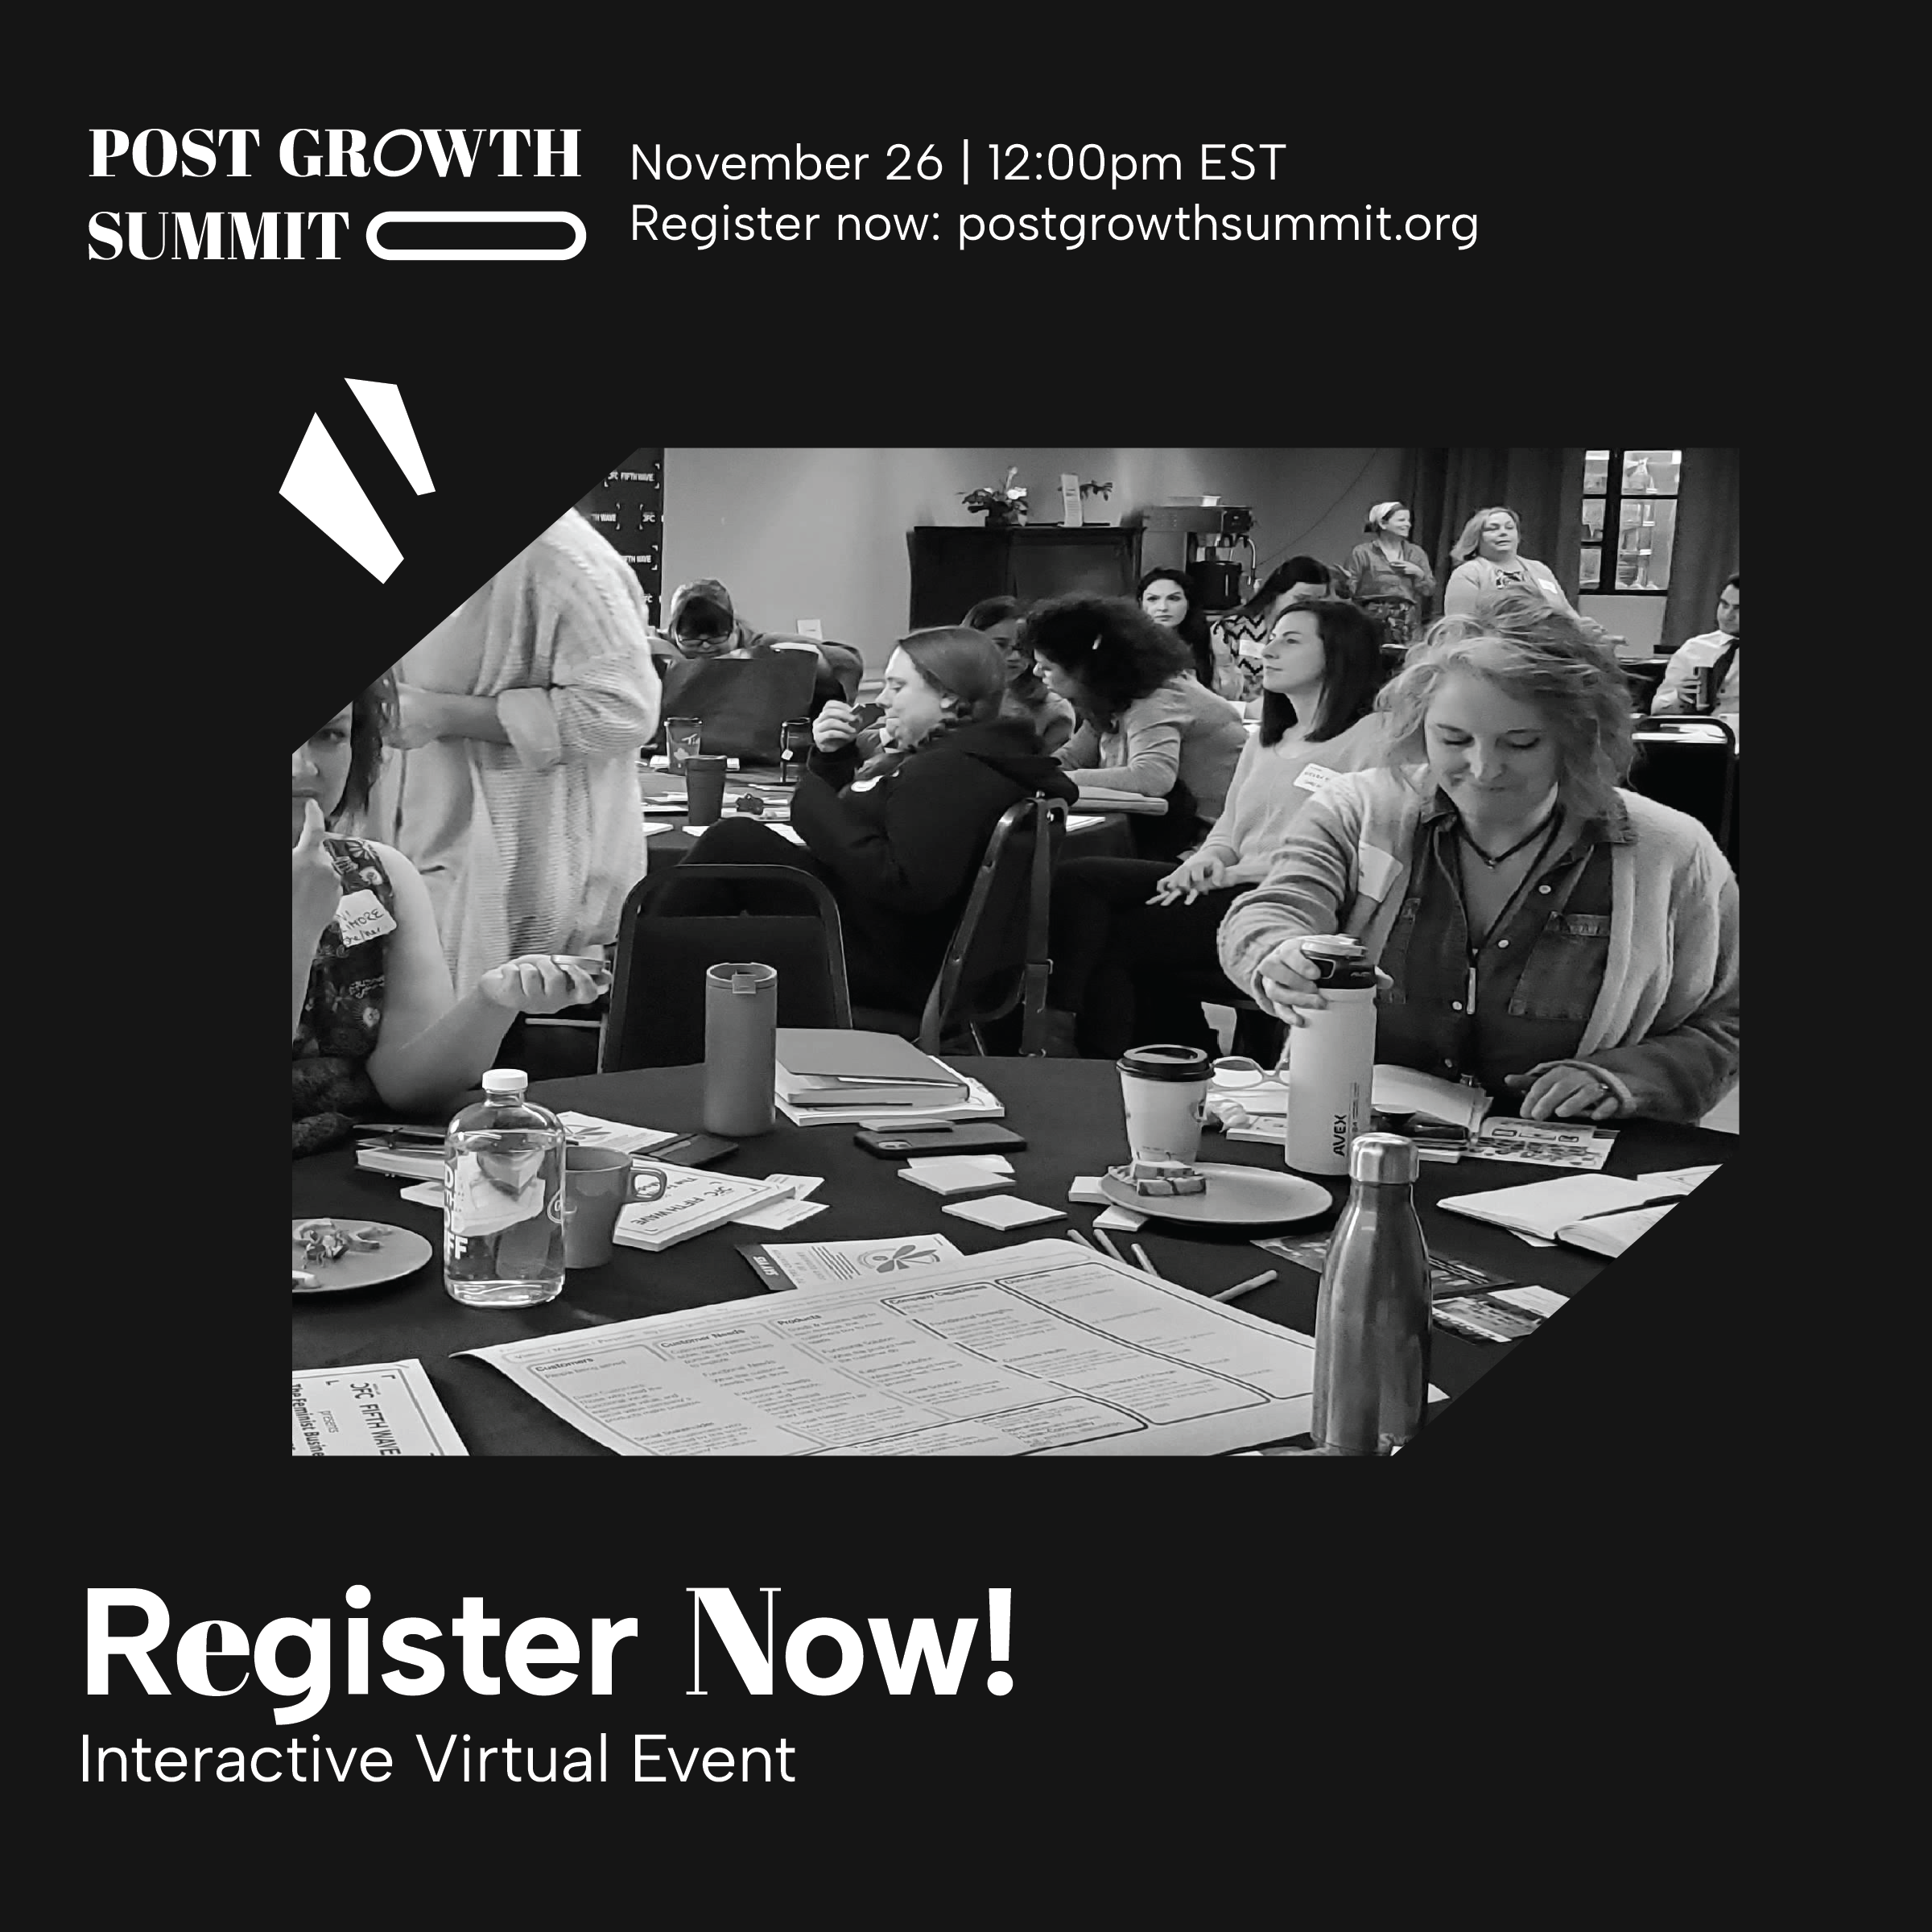 Post Growth Summit - November 26 at 12pm eastern. Register for this Interactive Virtual Event